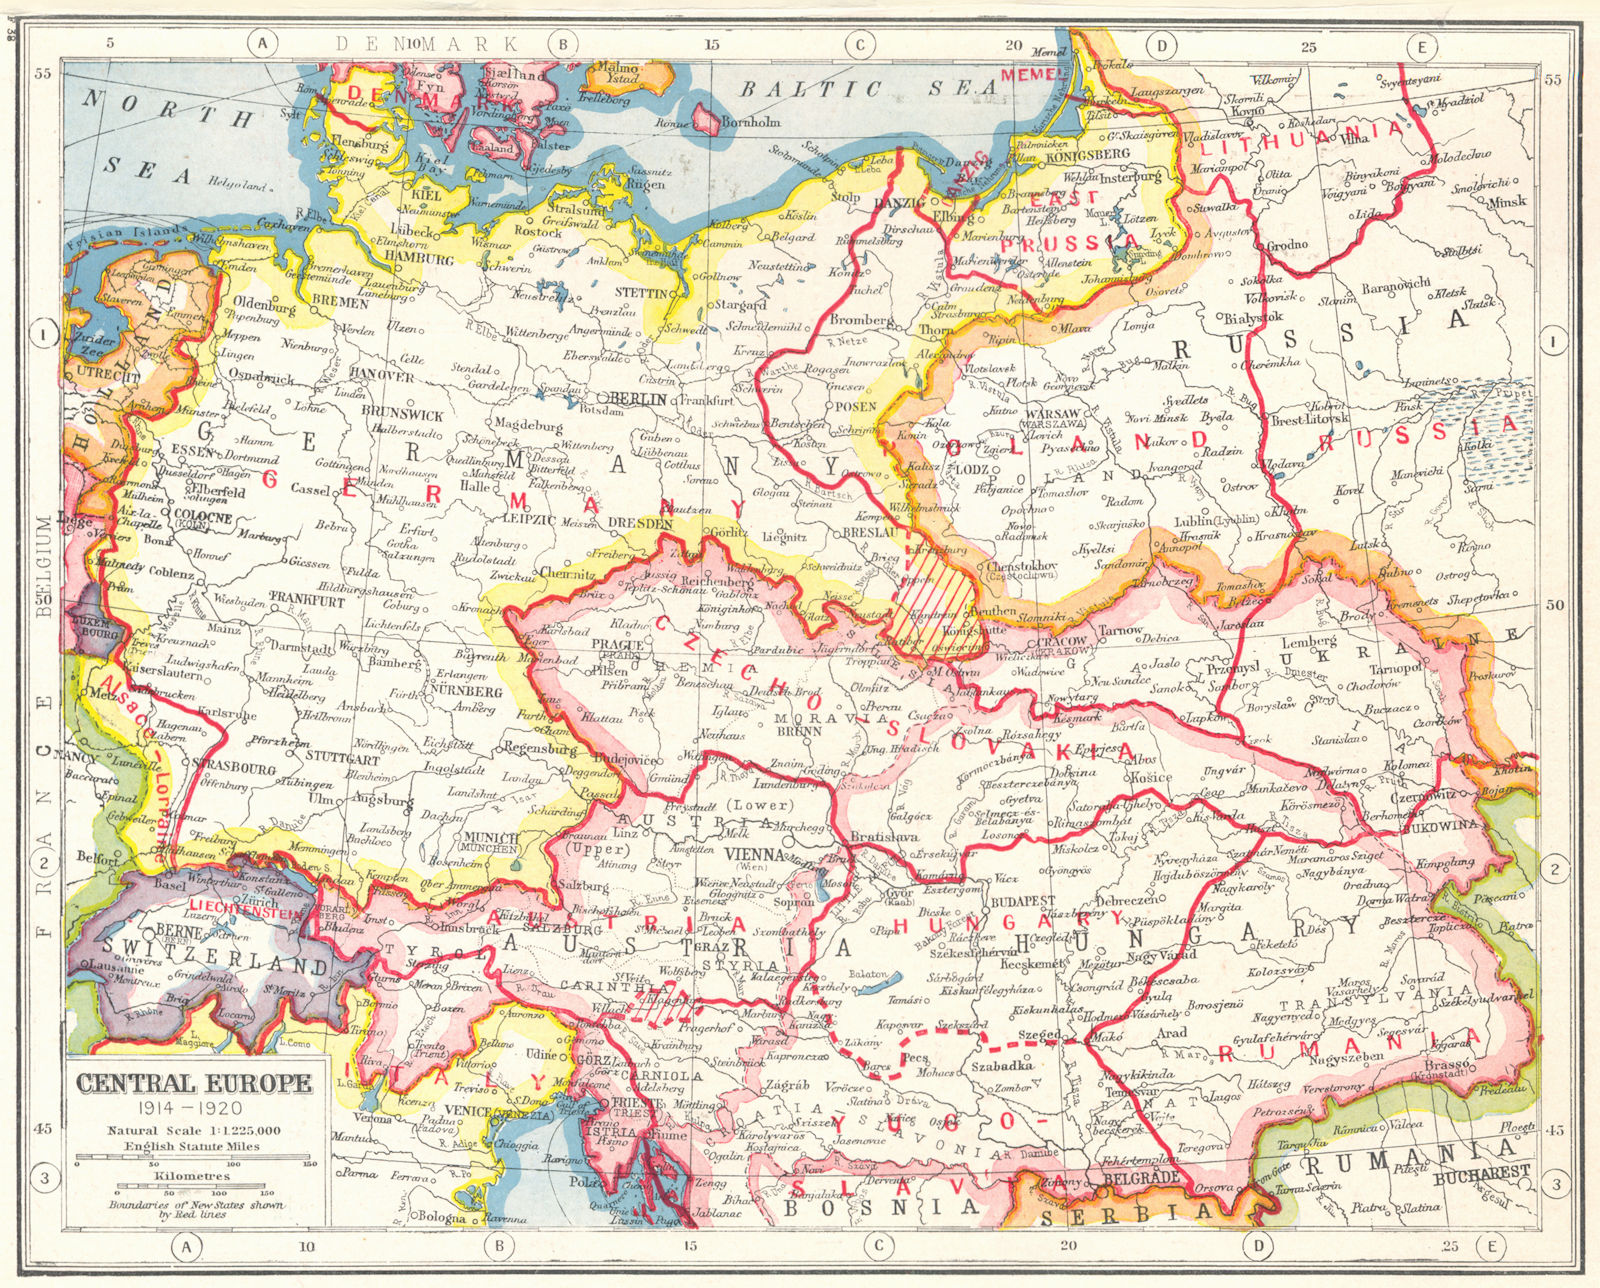 CENTRAL EUROPE. 1914-1920 border changes due to First World War 1 1920 old map